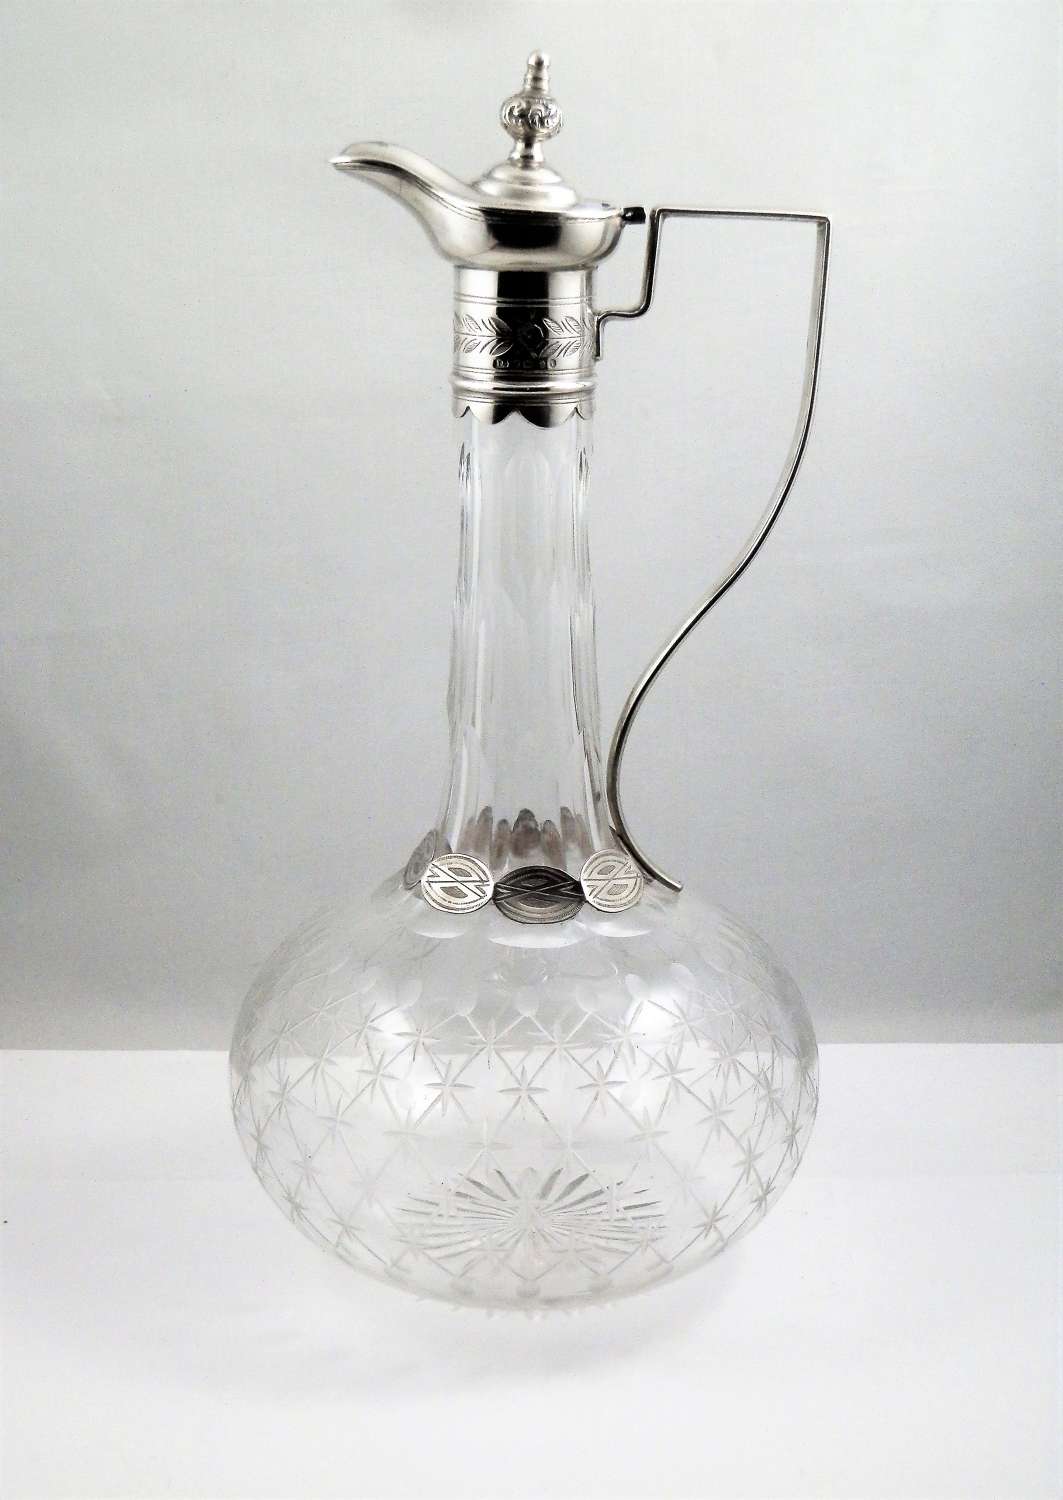 Victorian silver and cut glass decanter, 1885